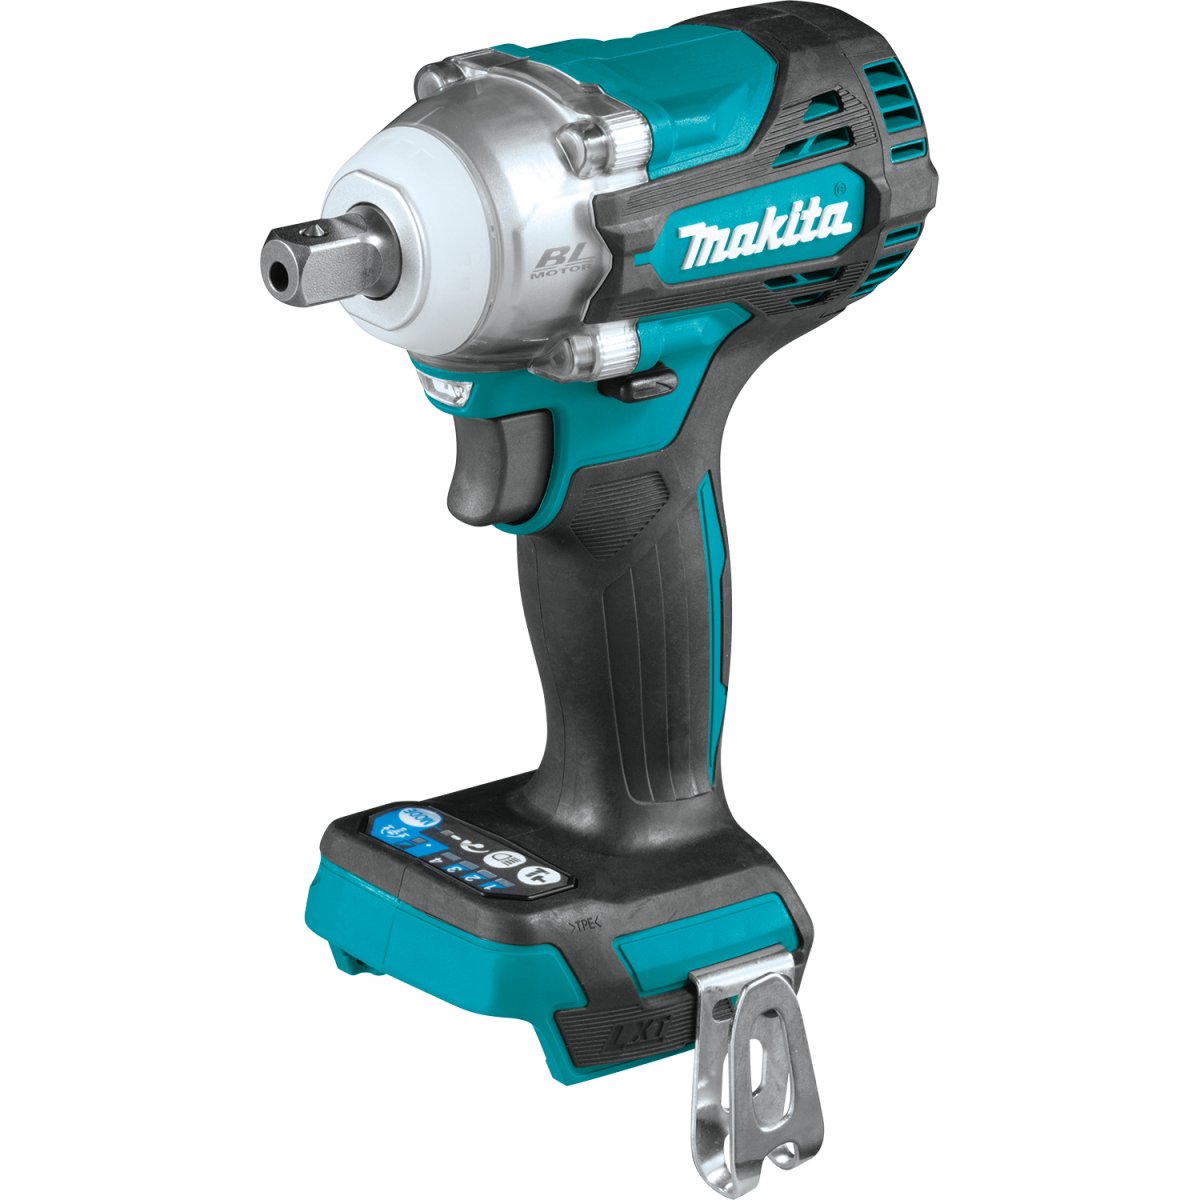 18V LXT® Lithium‑Ion Brushless Cordless 4‑Speed 1/2" Sq. Drive Utility Impact Wrench w/ Detent Anvil - Diamond Tool Store